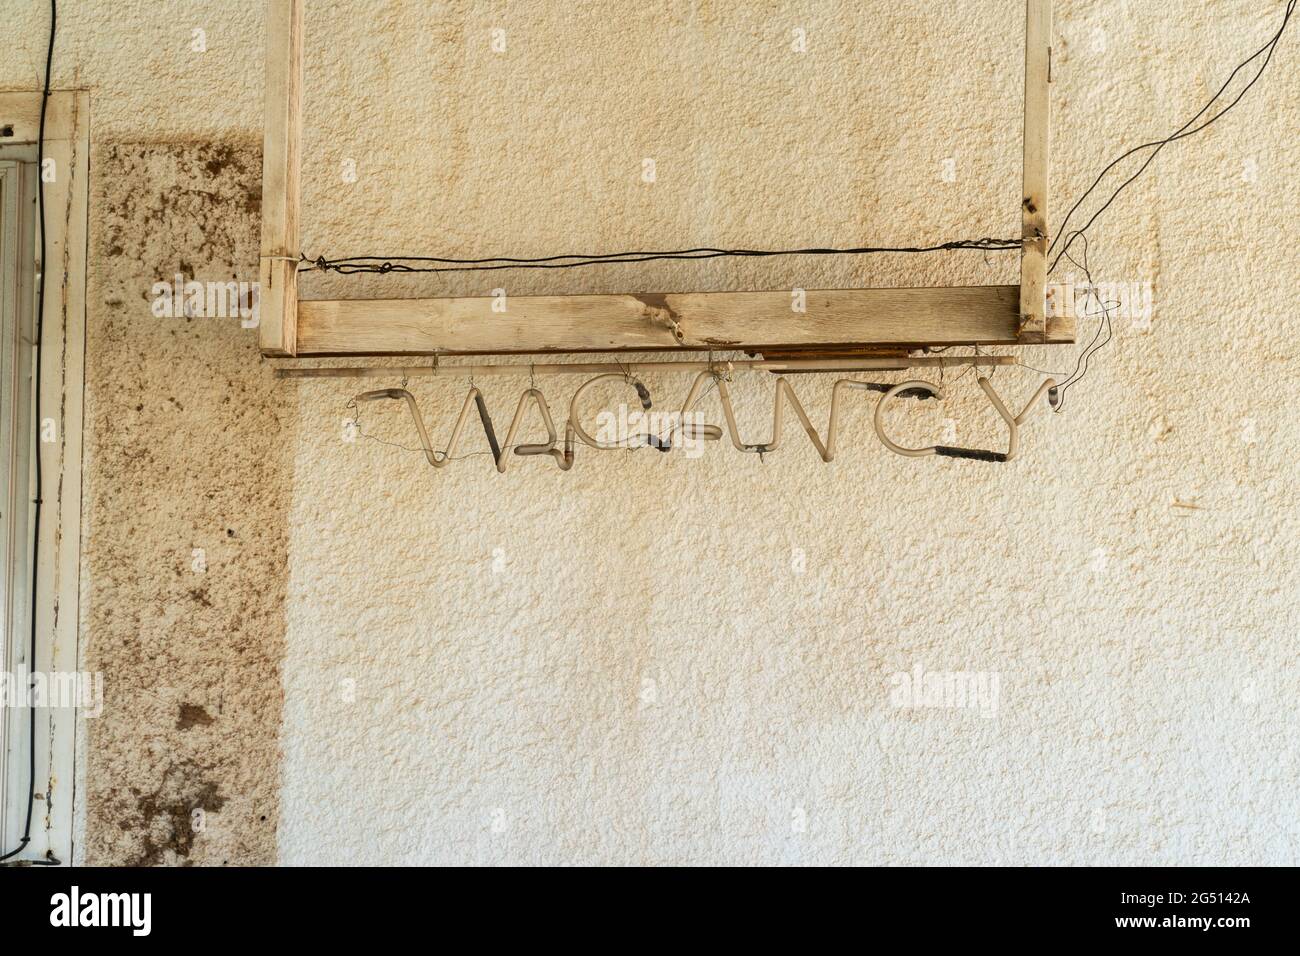 Old rusty vacancy sign against a wall at an abandoned motel Stock Photo